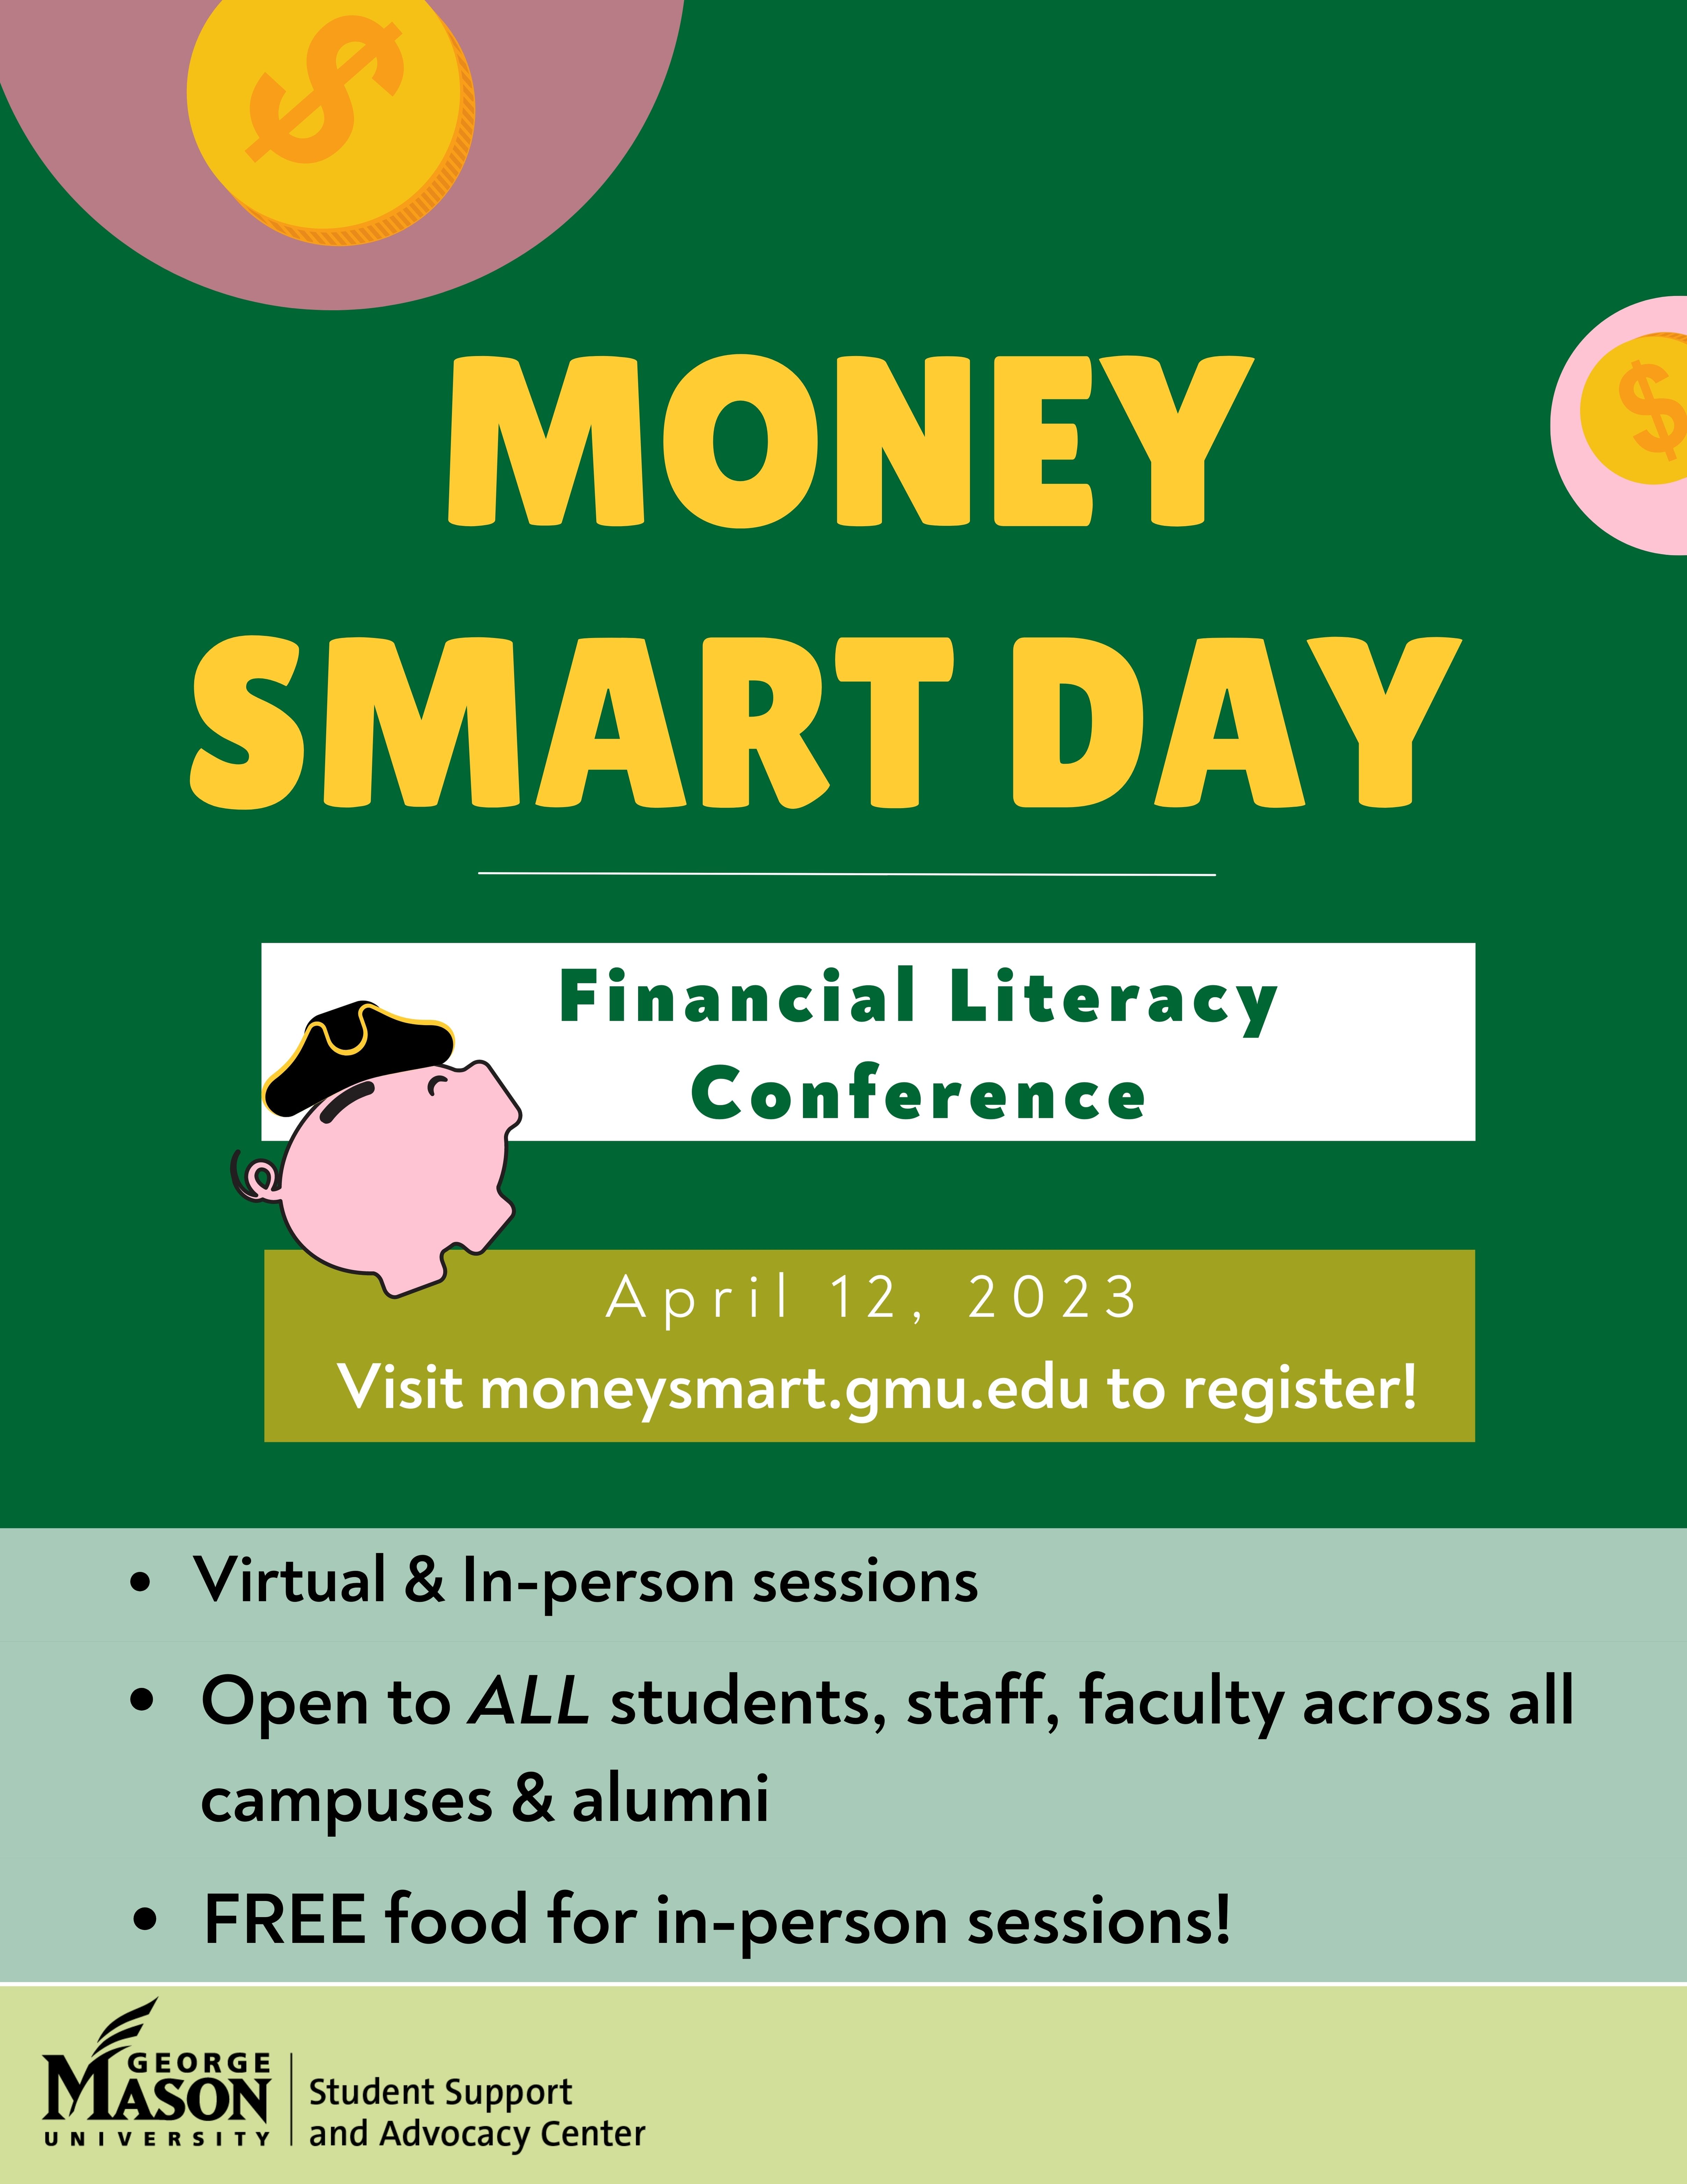 Money Smart Day Financial Literacy Conference - April 12, 2023 - virtual and in-person options.